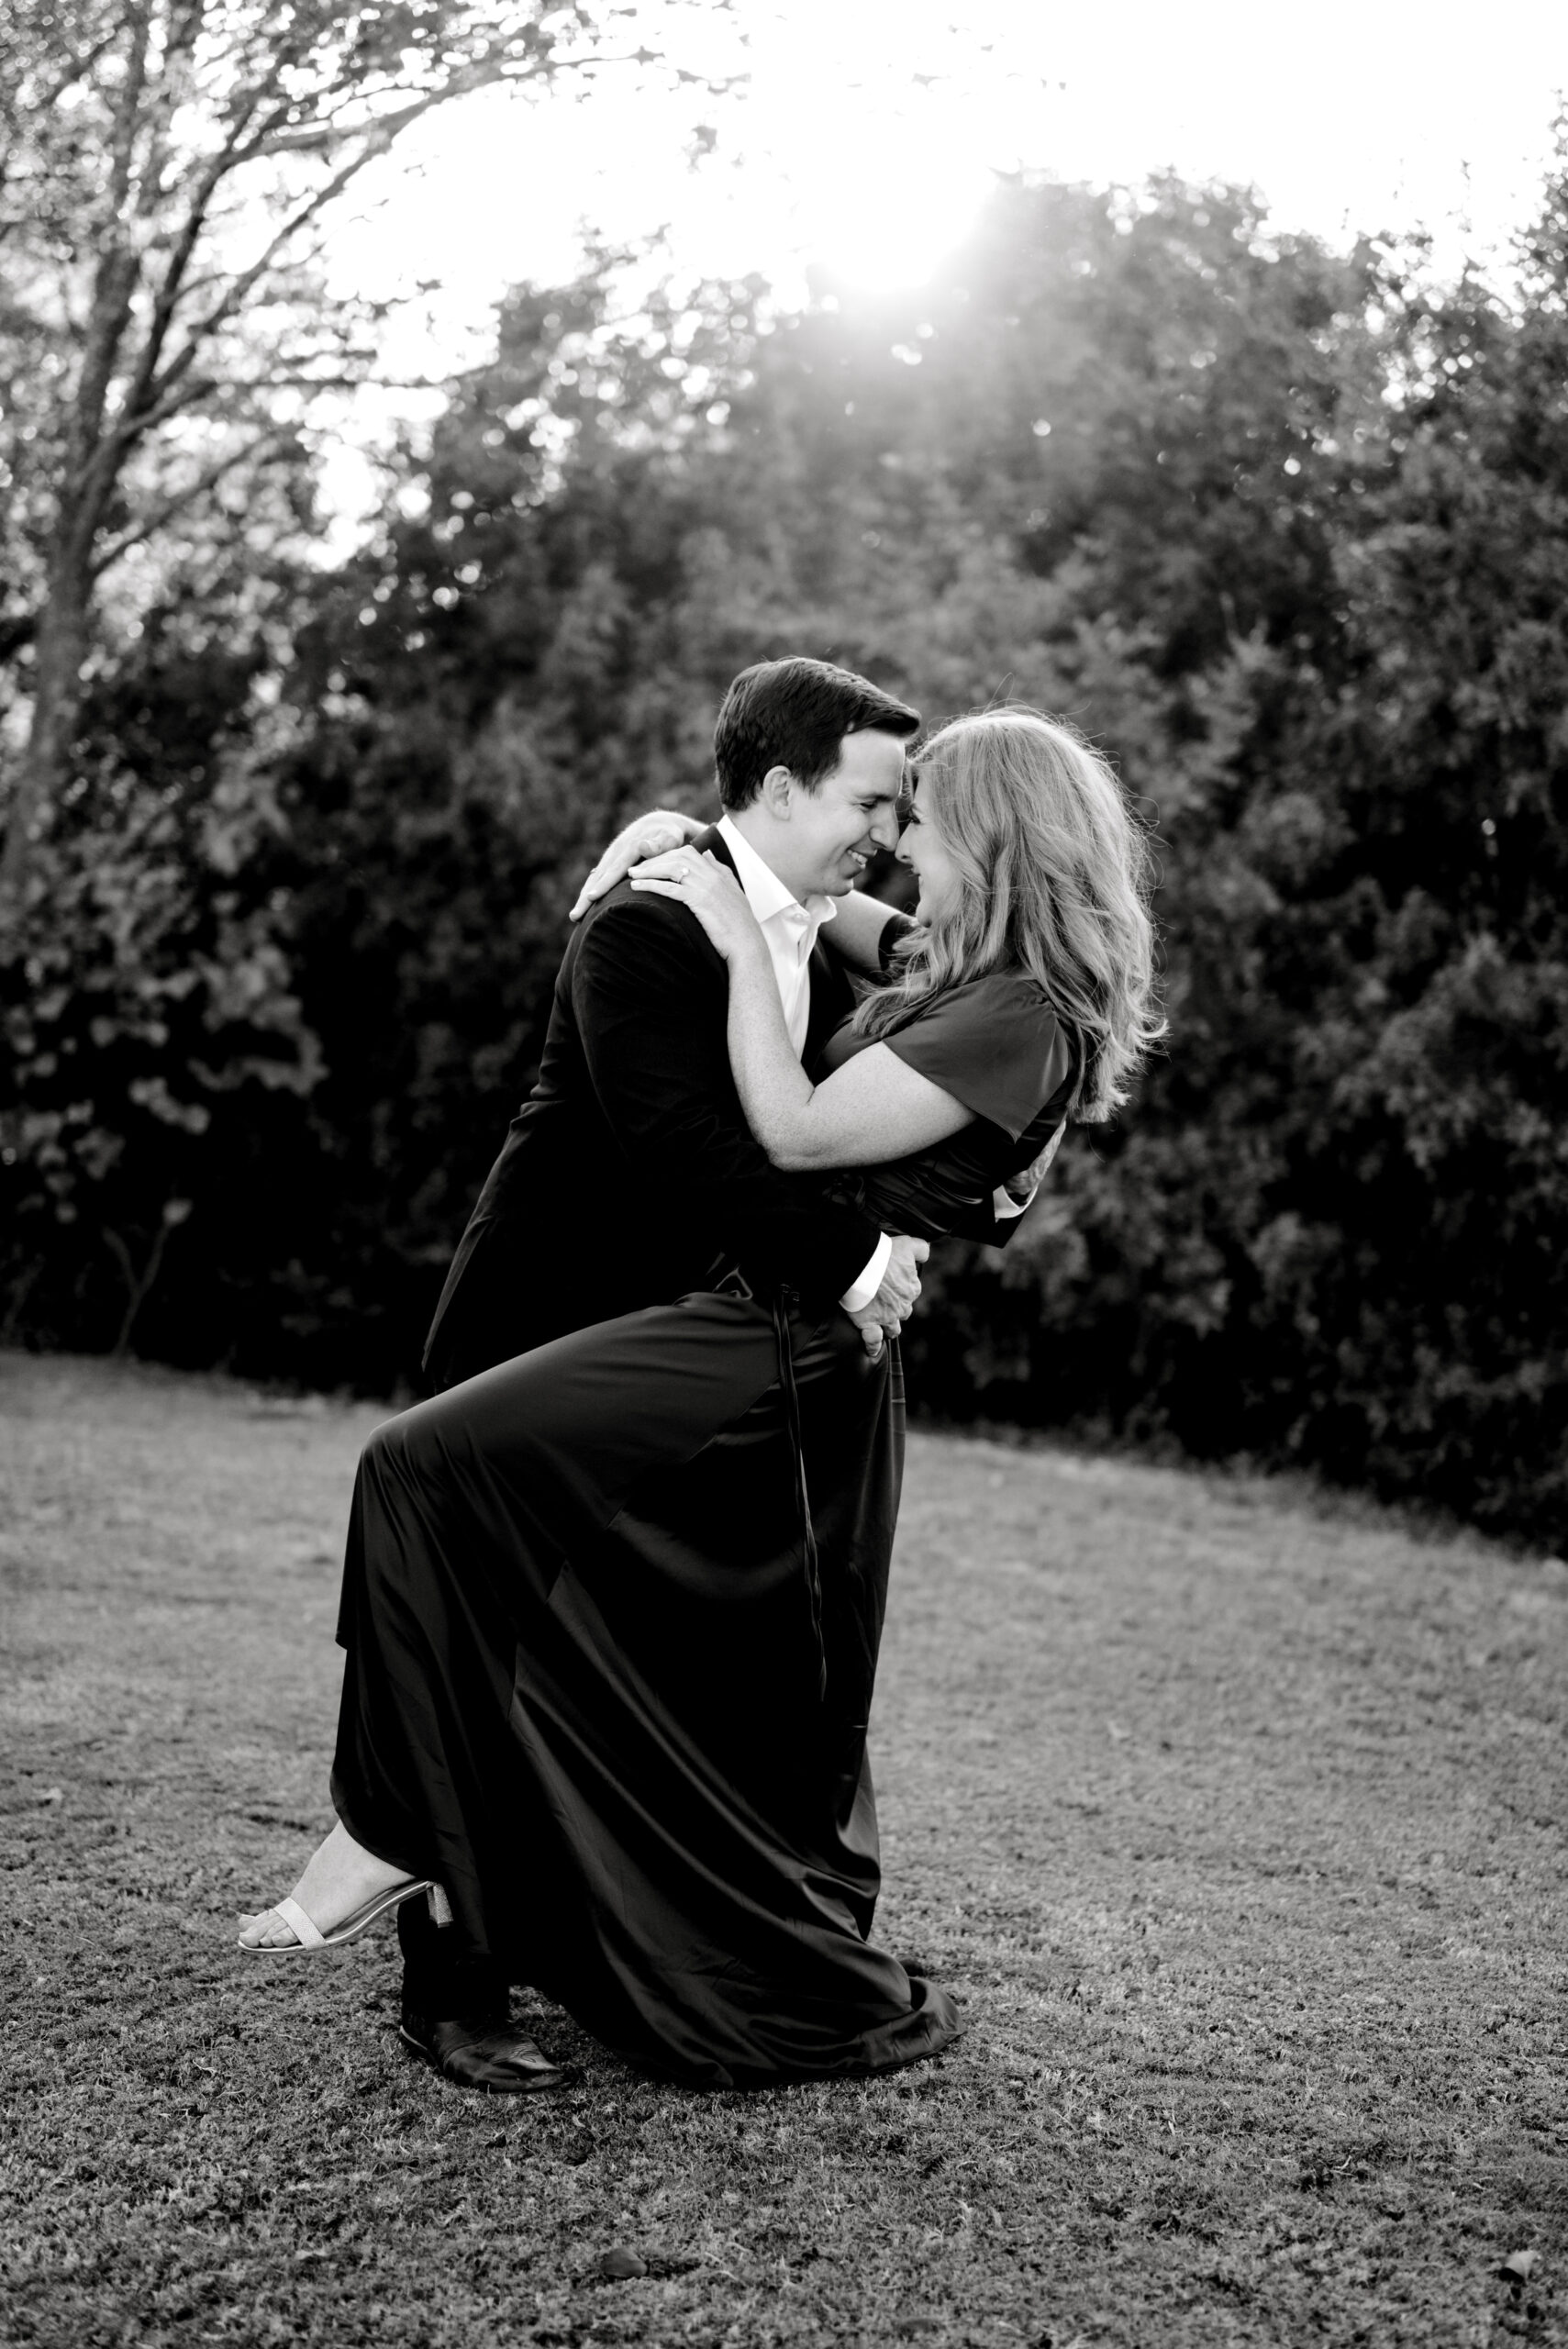 Couple dancing in black and white